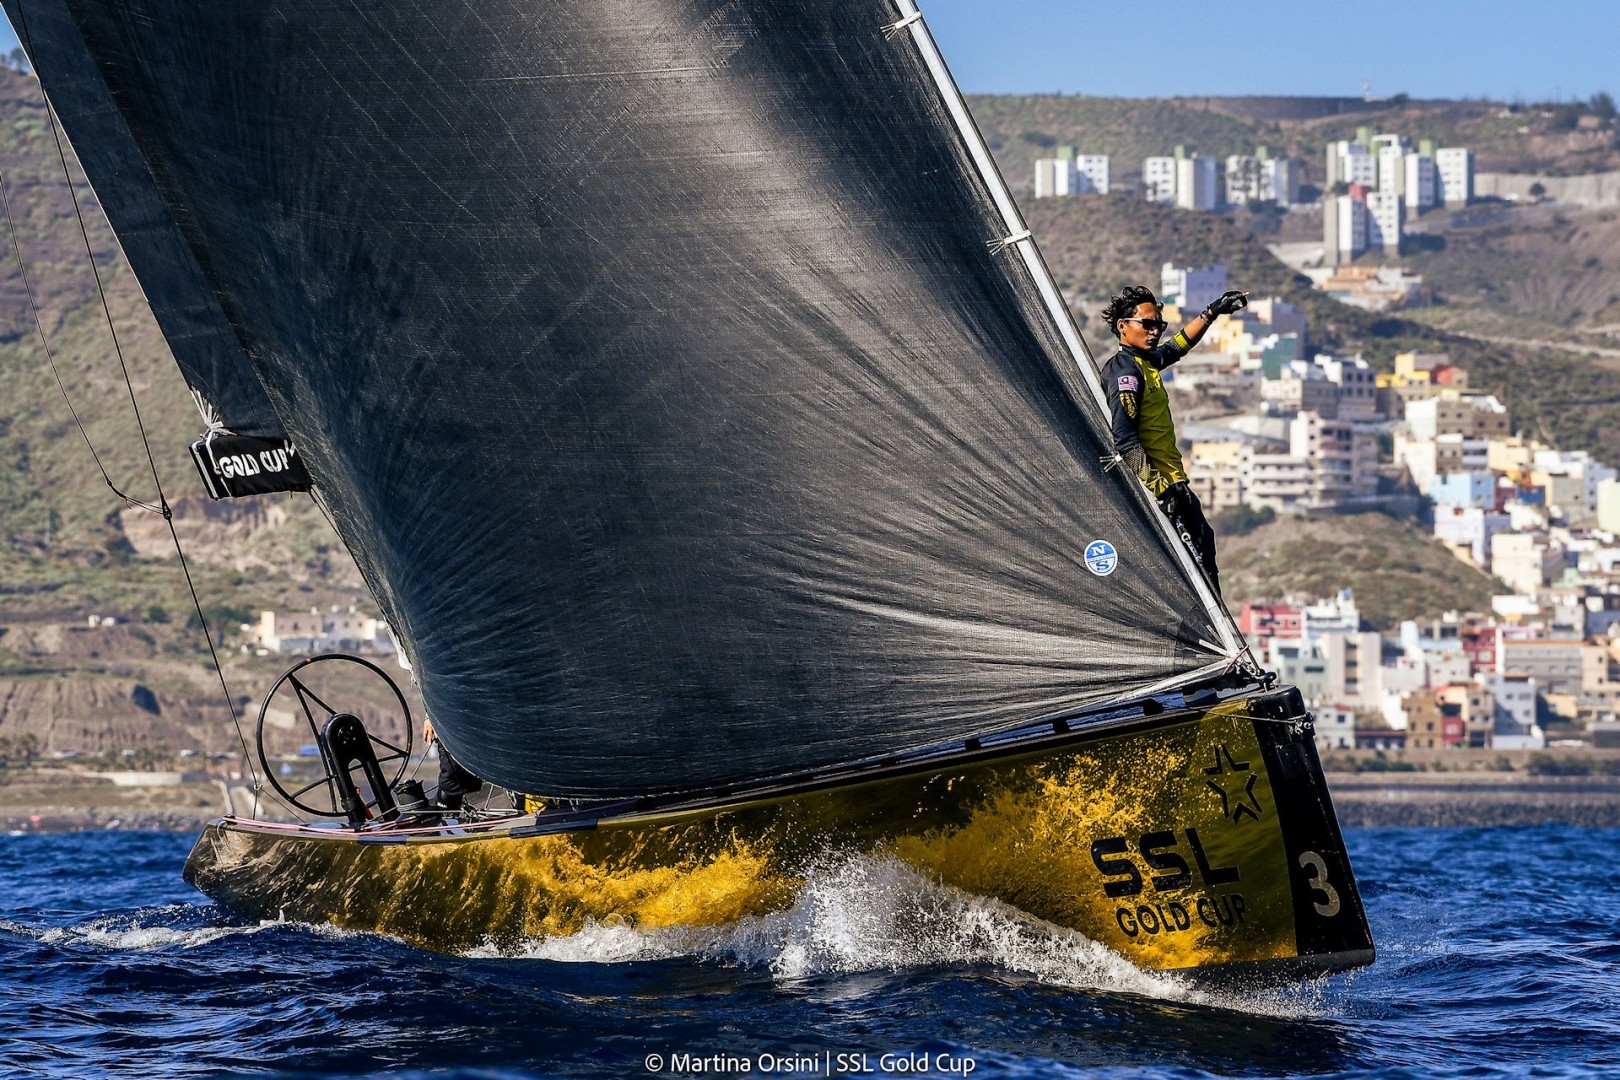 Maintaining the momentum on Day 3 of the 1/16 Finals at the SSL Gold Cup in Gran Canaria